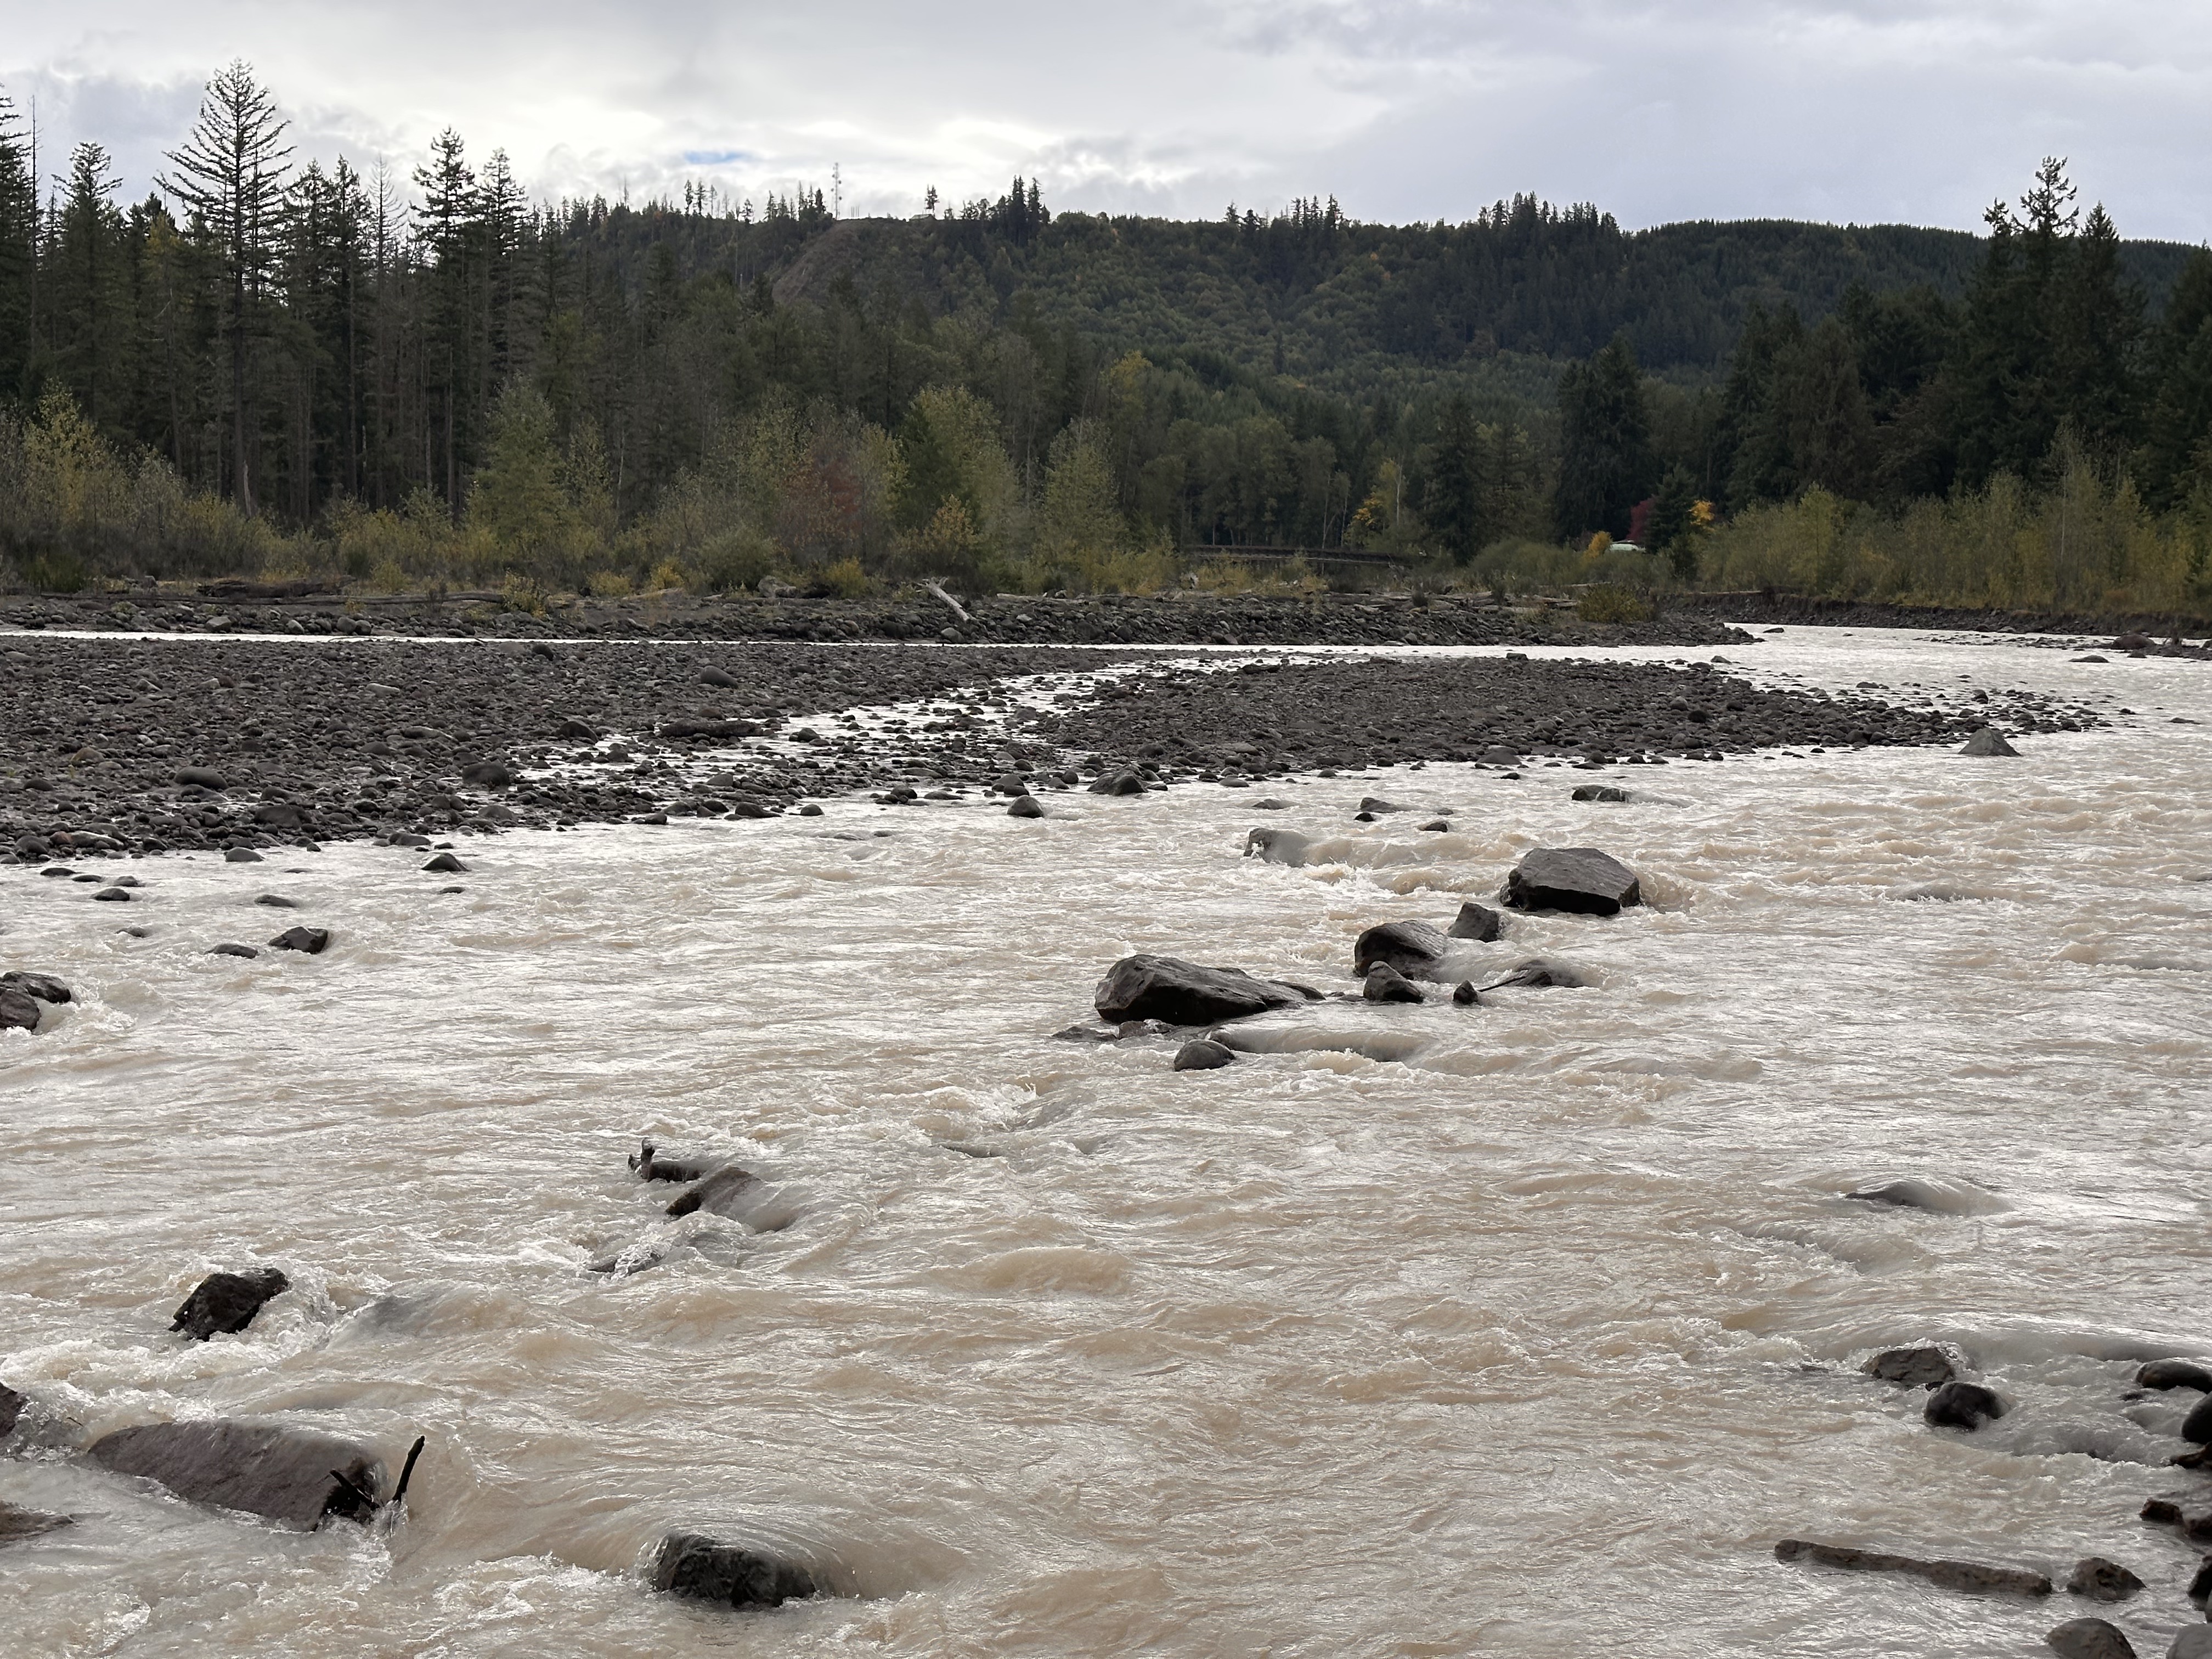 In Pierce County, levee setbacks have been completed along rivers, including the Puyallup. This picture shows the river running near the Orville Road Setback Revetment. Projects like these are included in the new flood hazard management plan. (Credit: Lauren Gallup / NWPB)